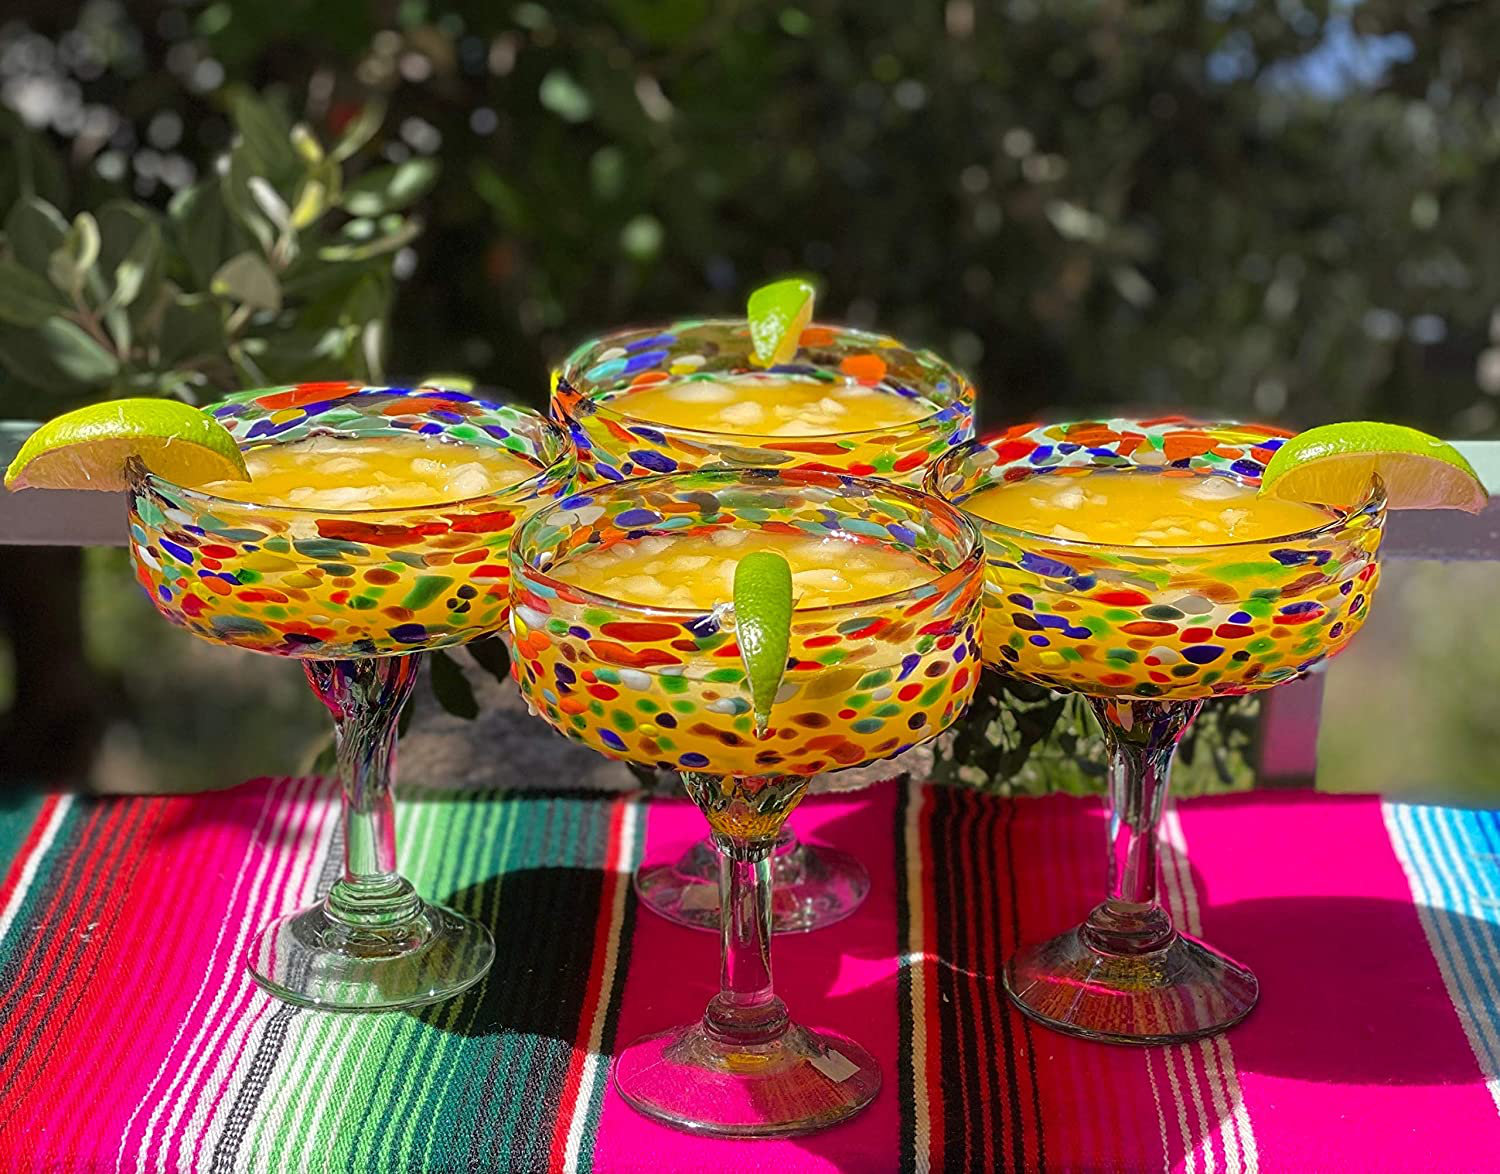 Mexican Bubble Glass Rocks With Green Rim